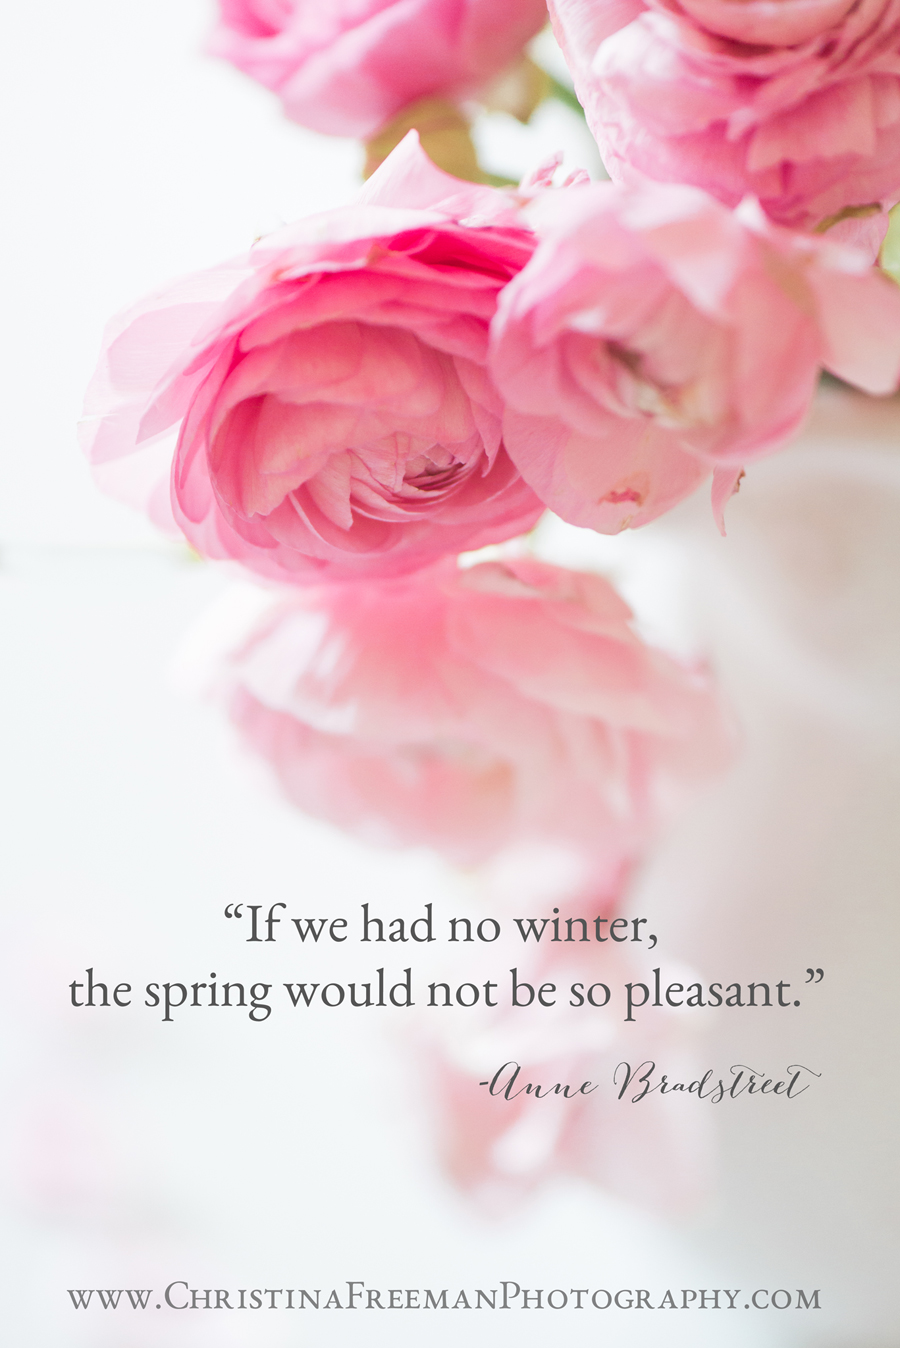 Happy Spring from Christina Freeman Photography